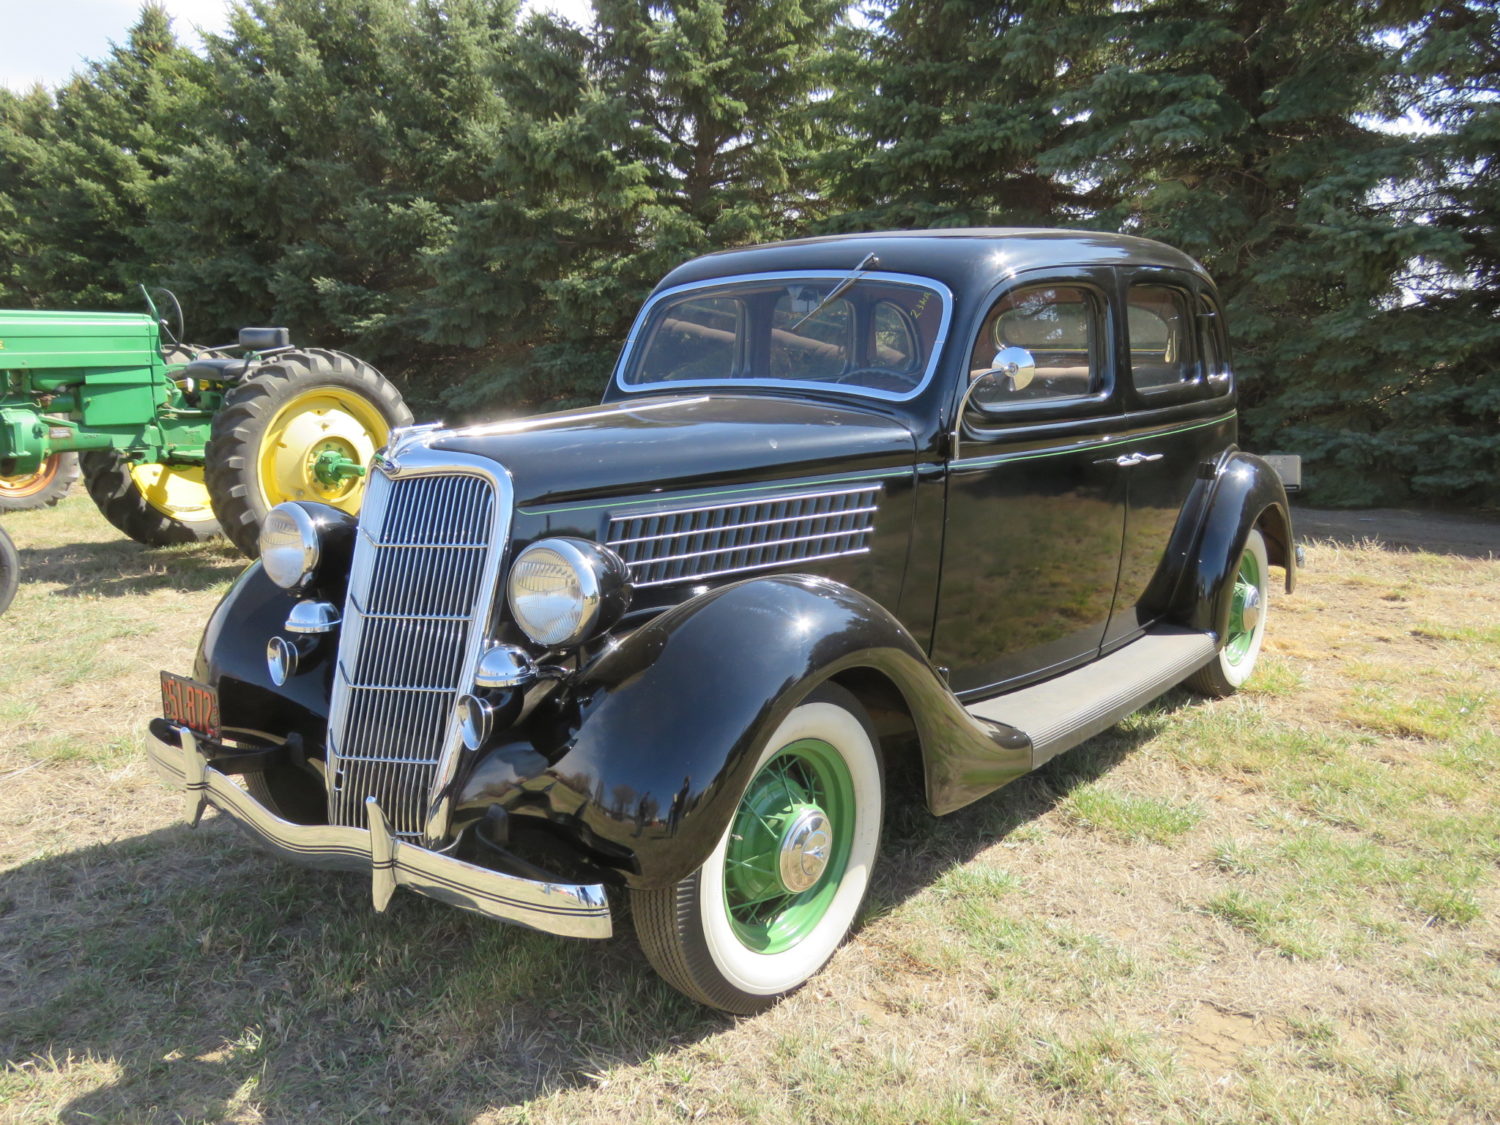 Fabulous Collector Cars, Antique Tractors, Memorabilia & More! The Krinke Collection - image 11